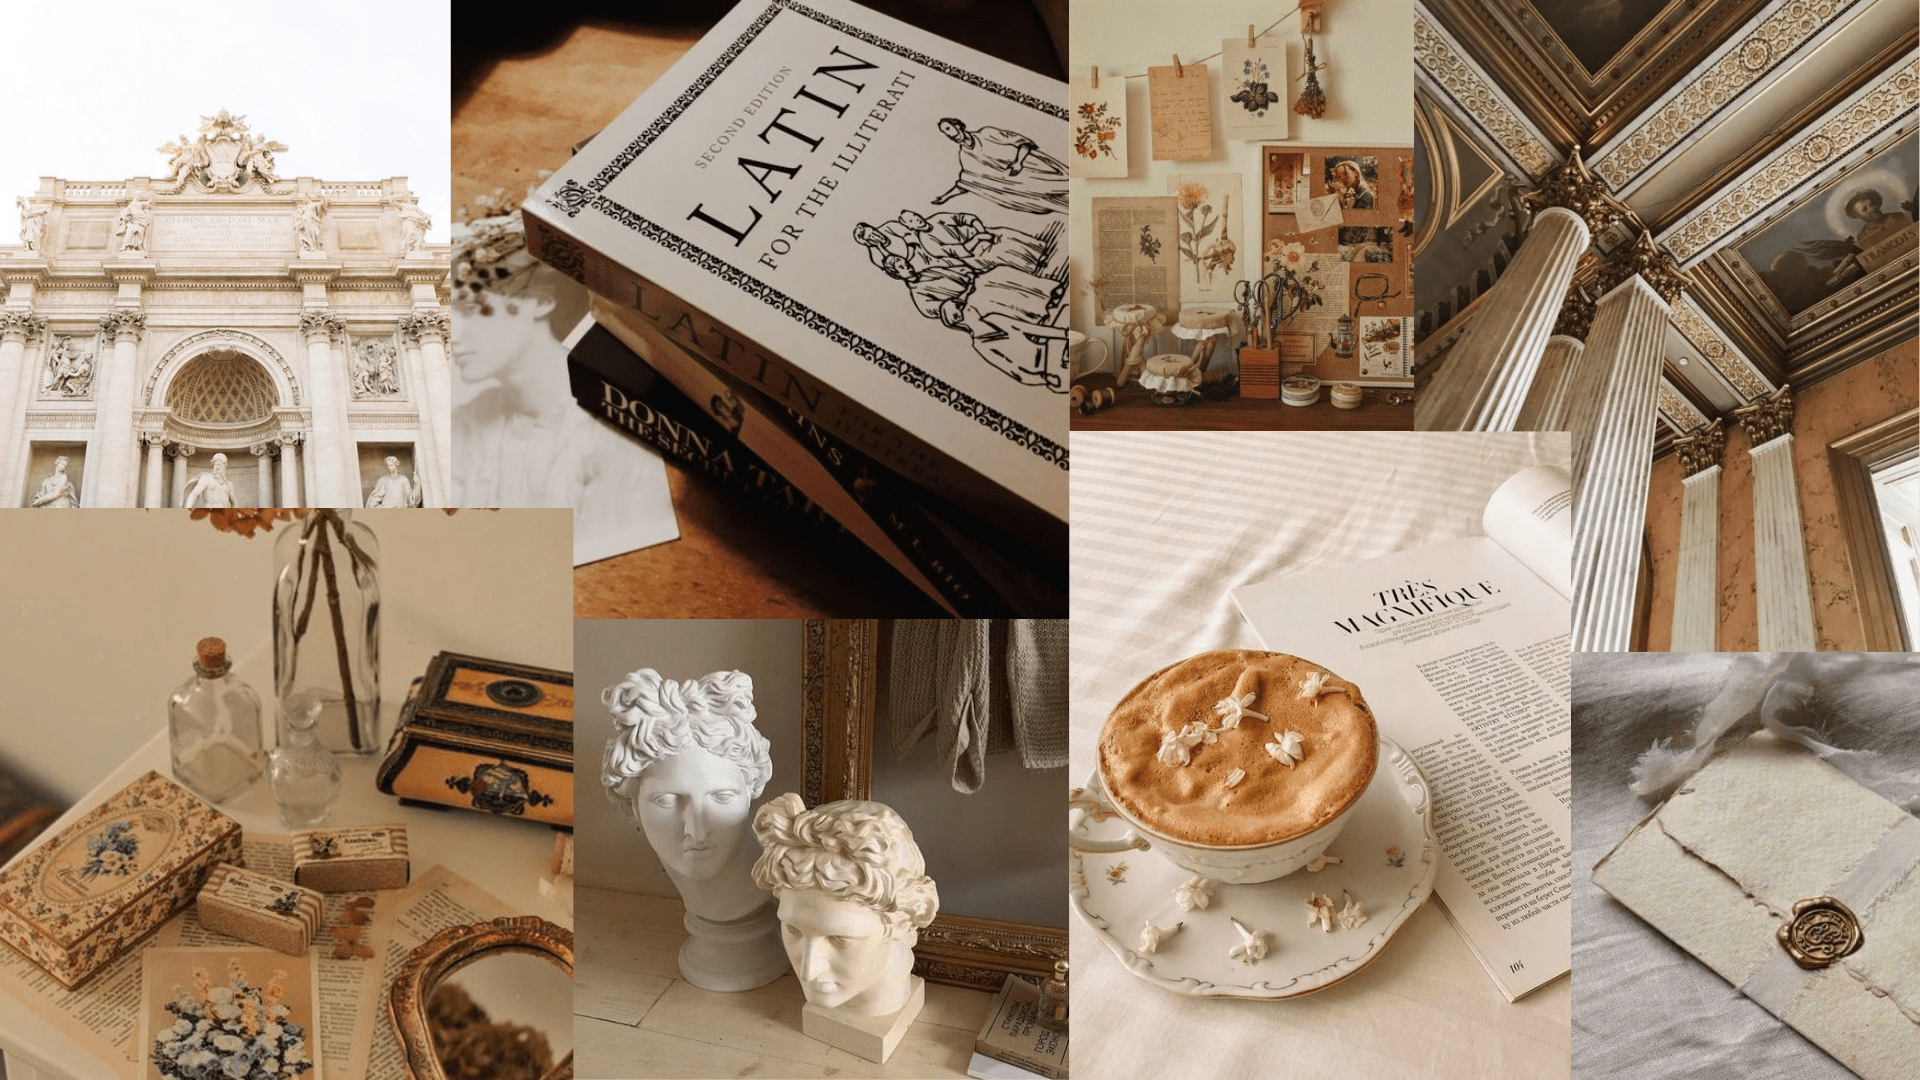 A collage of images of books, a coffee cup, a statue, and a building. - Light academia